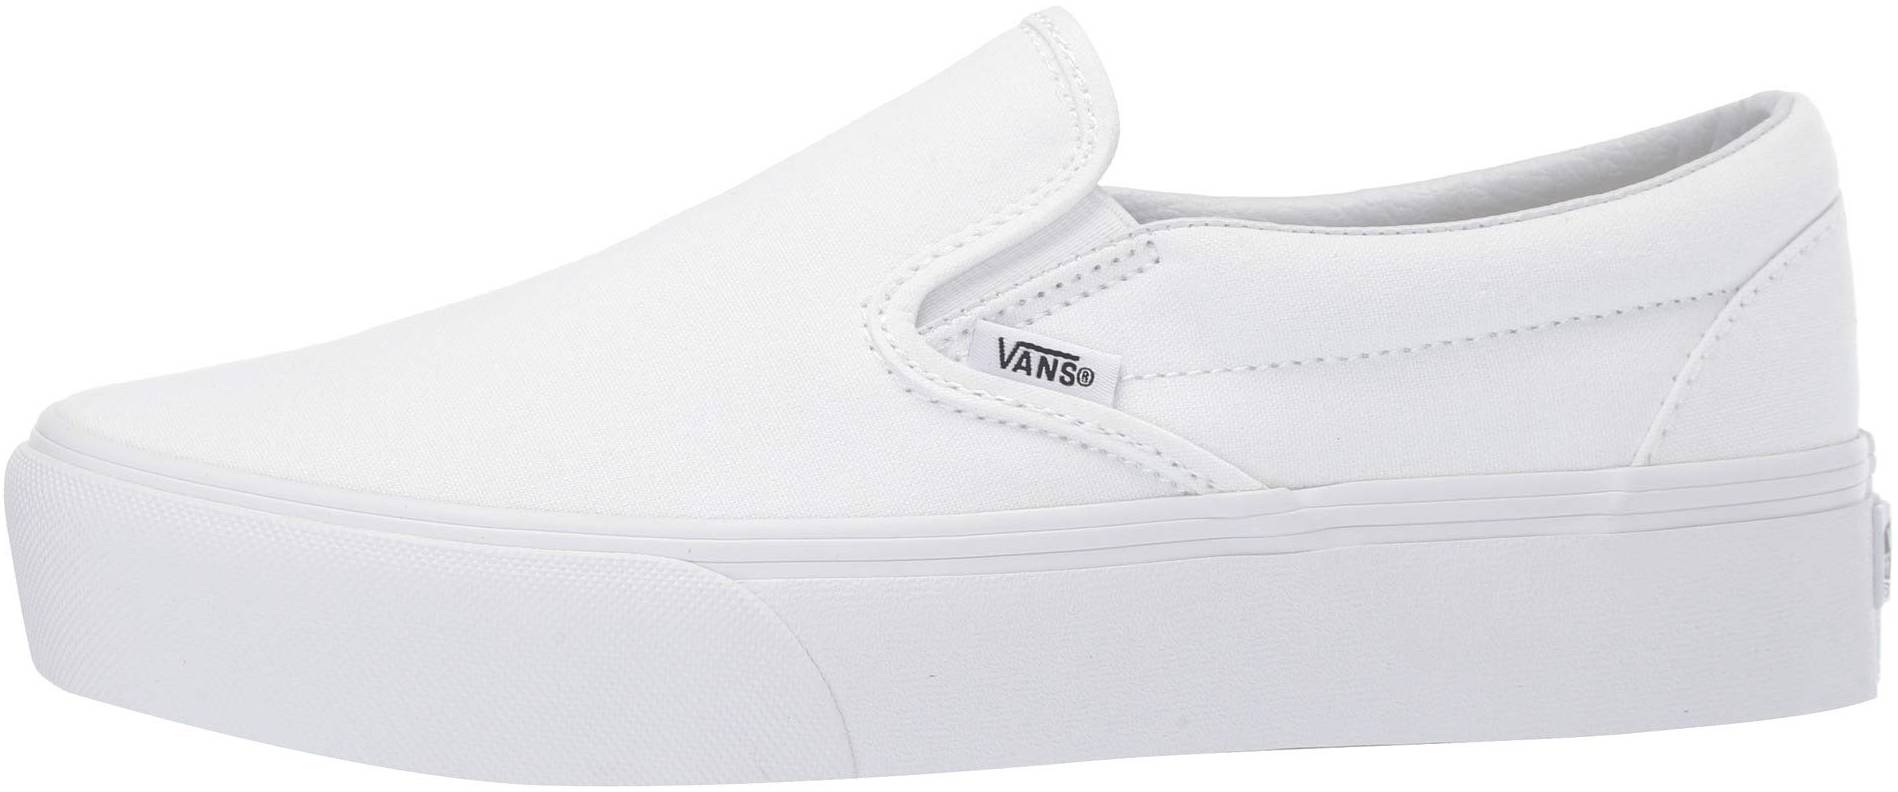 30+ White Vans sneakers: Save up to 17 